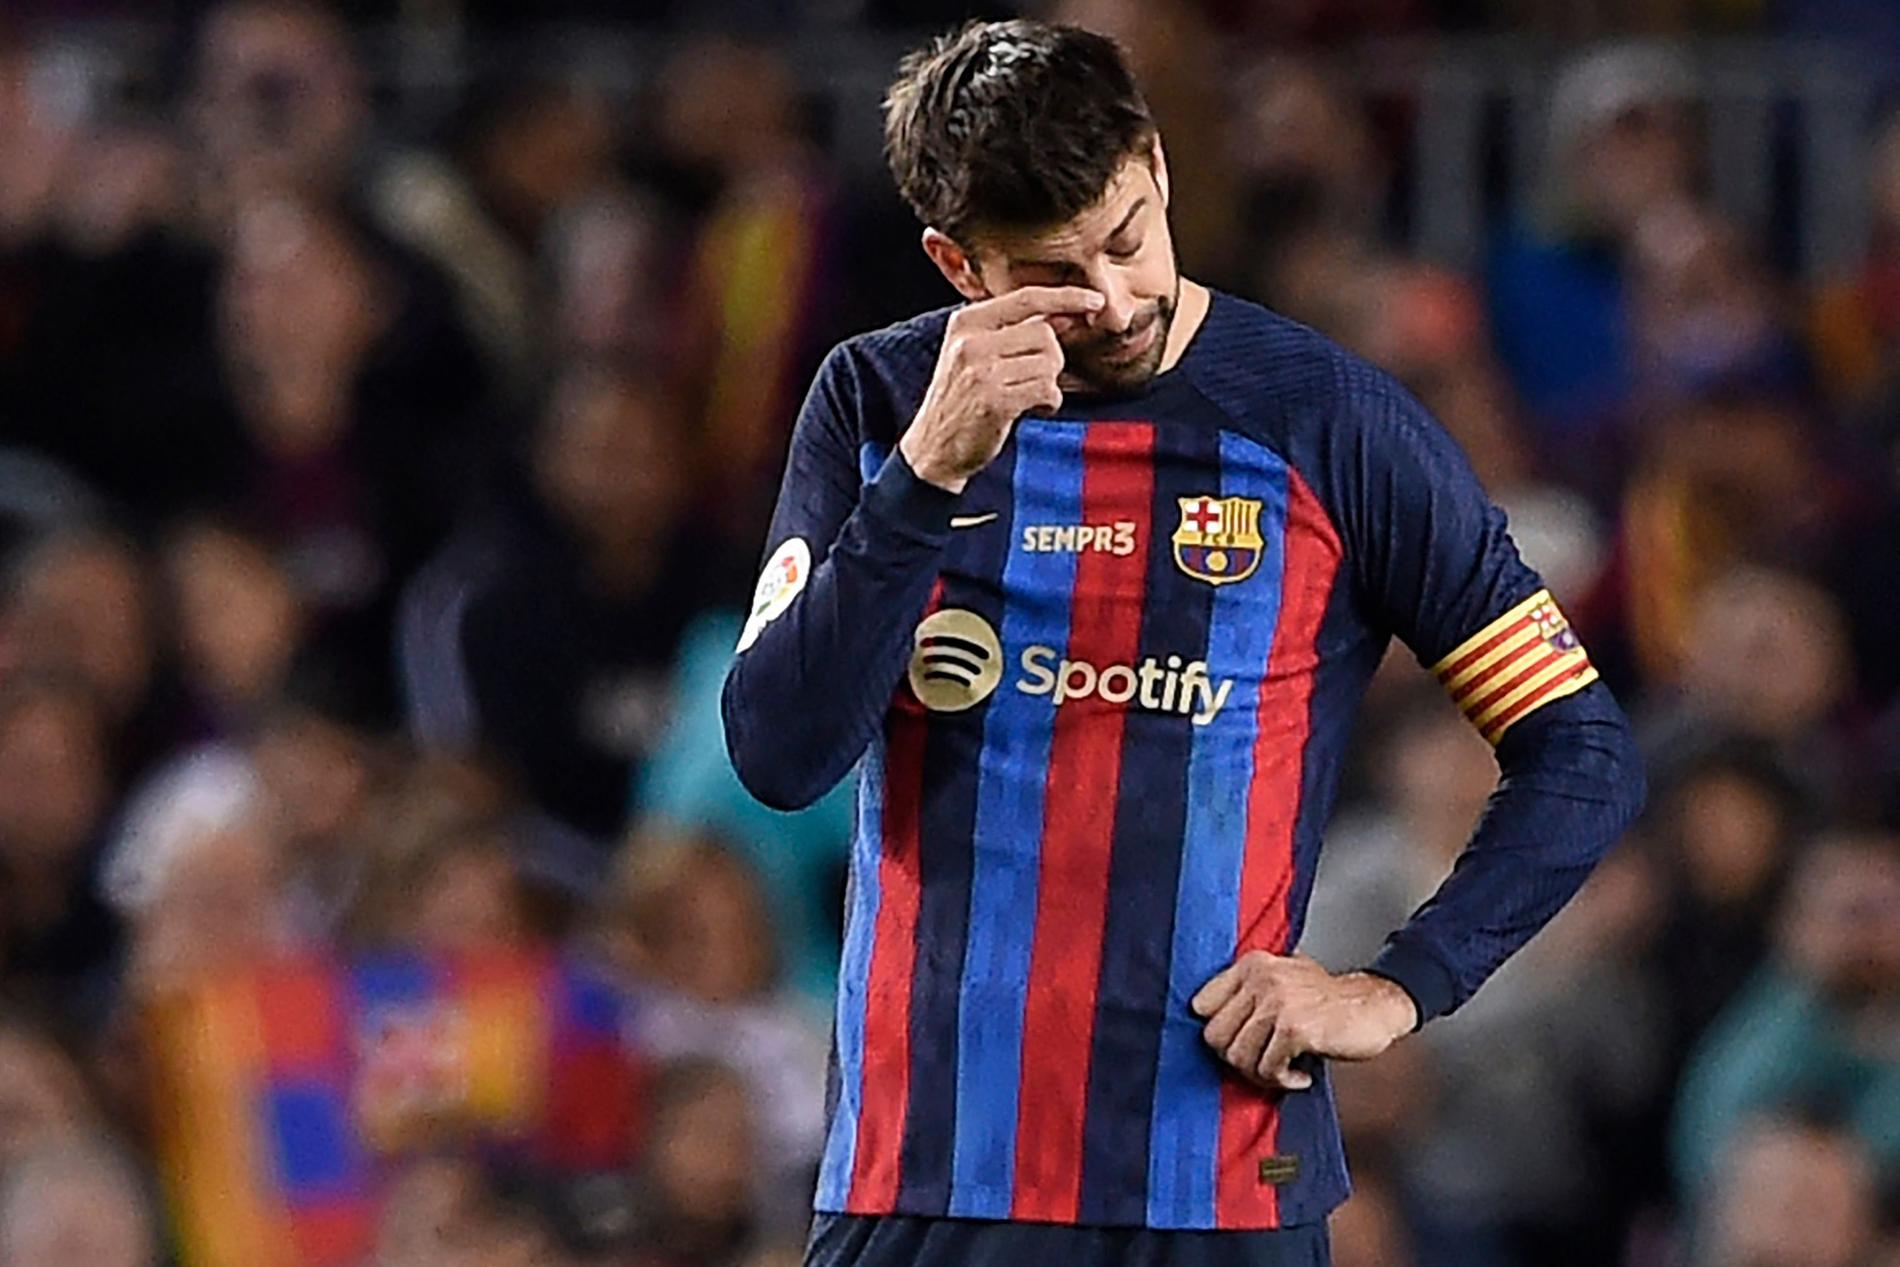 Pique ended his career in tears